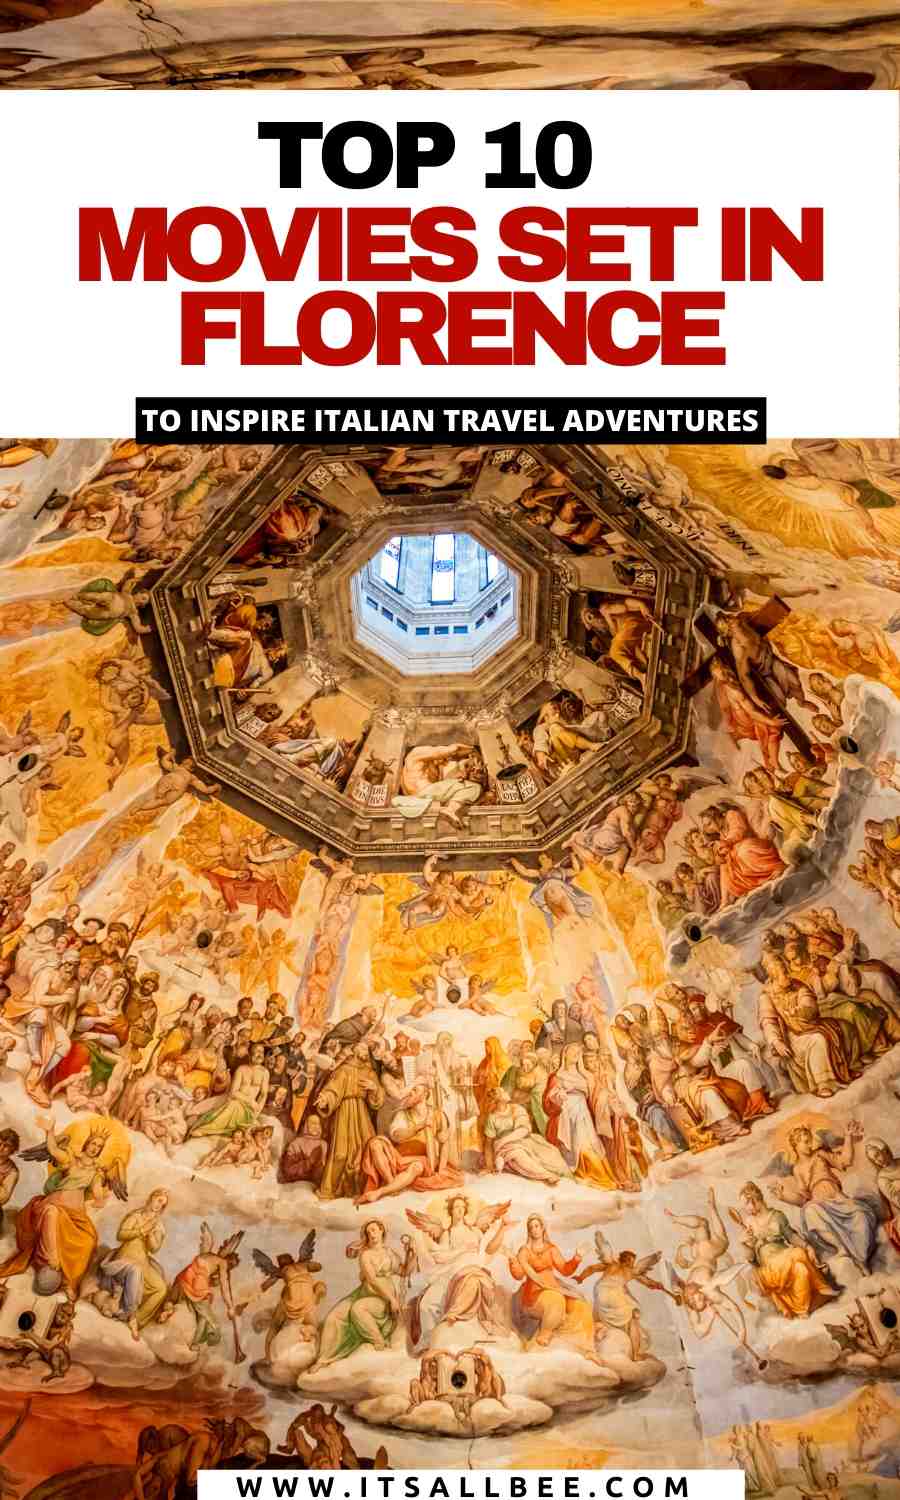 Movies about Florence